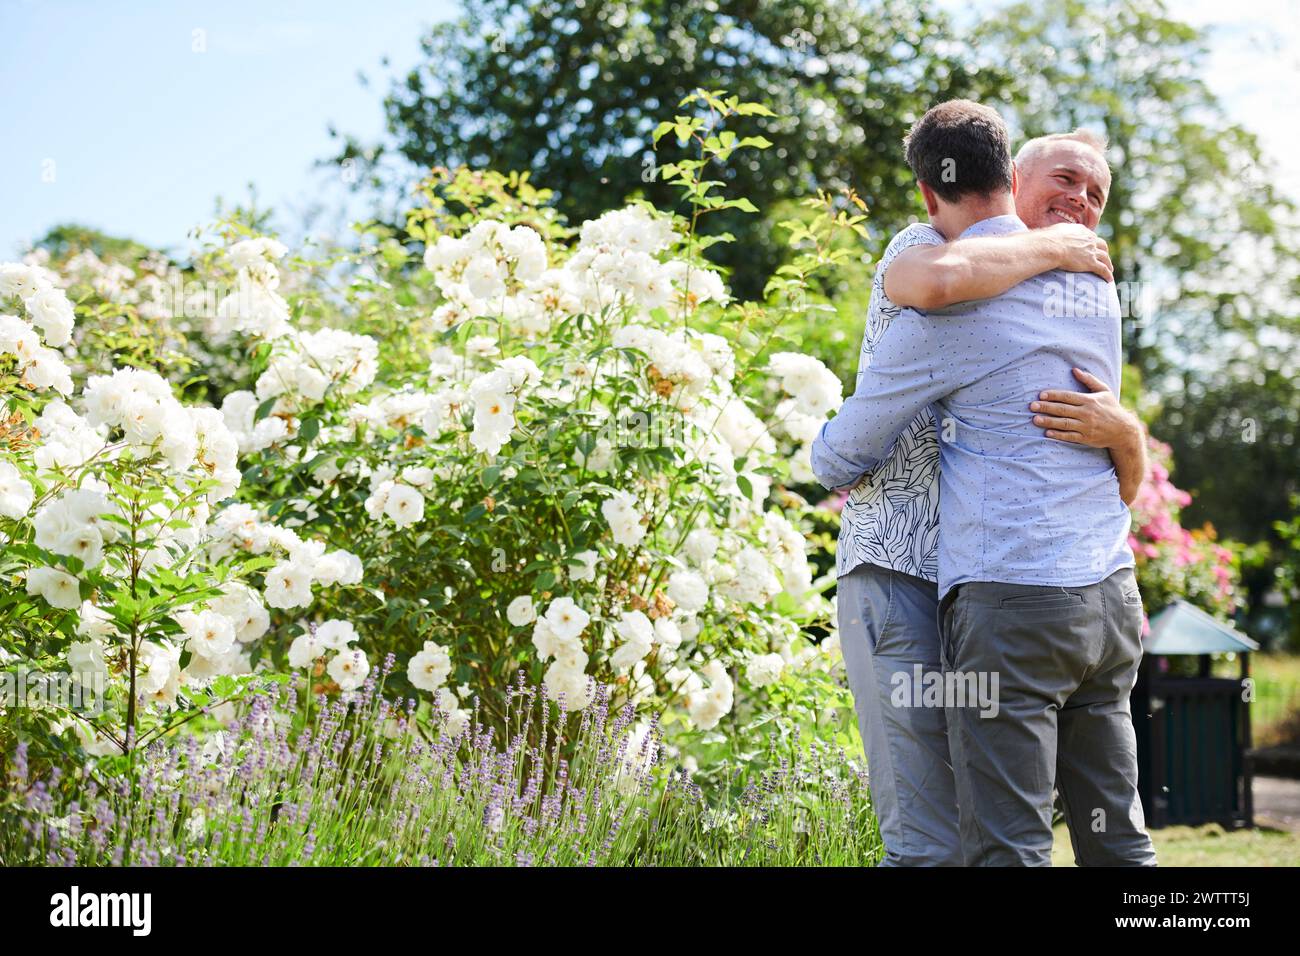 Two people embracing in a flower garden Stock Photo